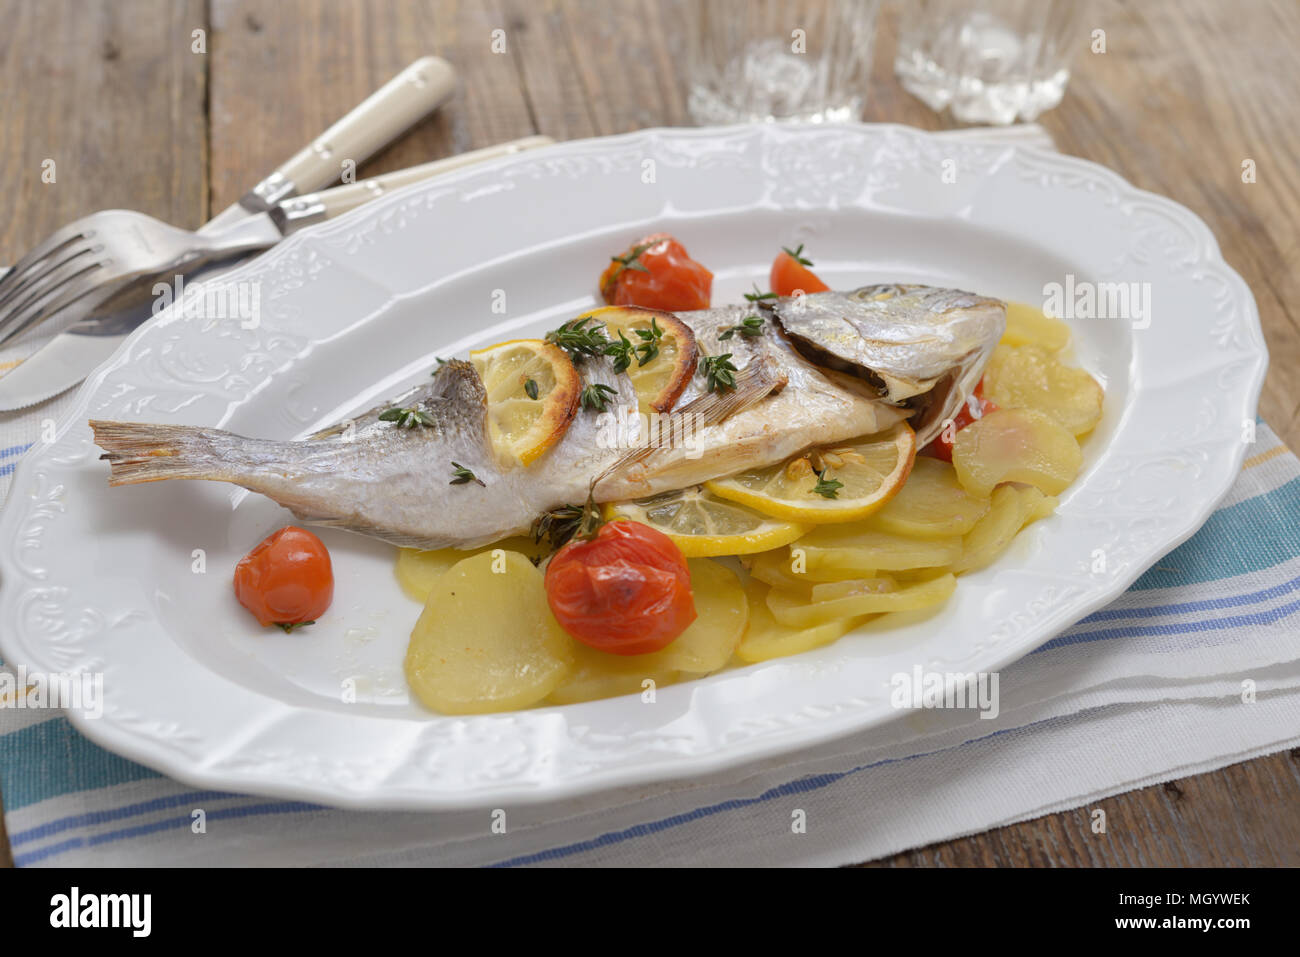 Baked sea bream with vegetables on an oval dish Stock Photo